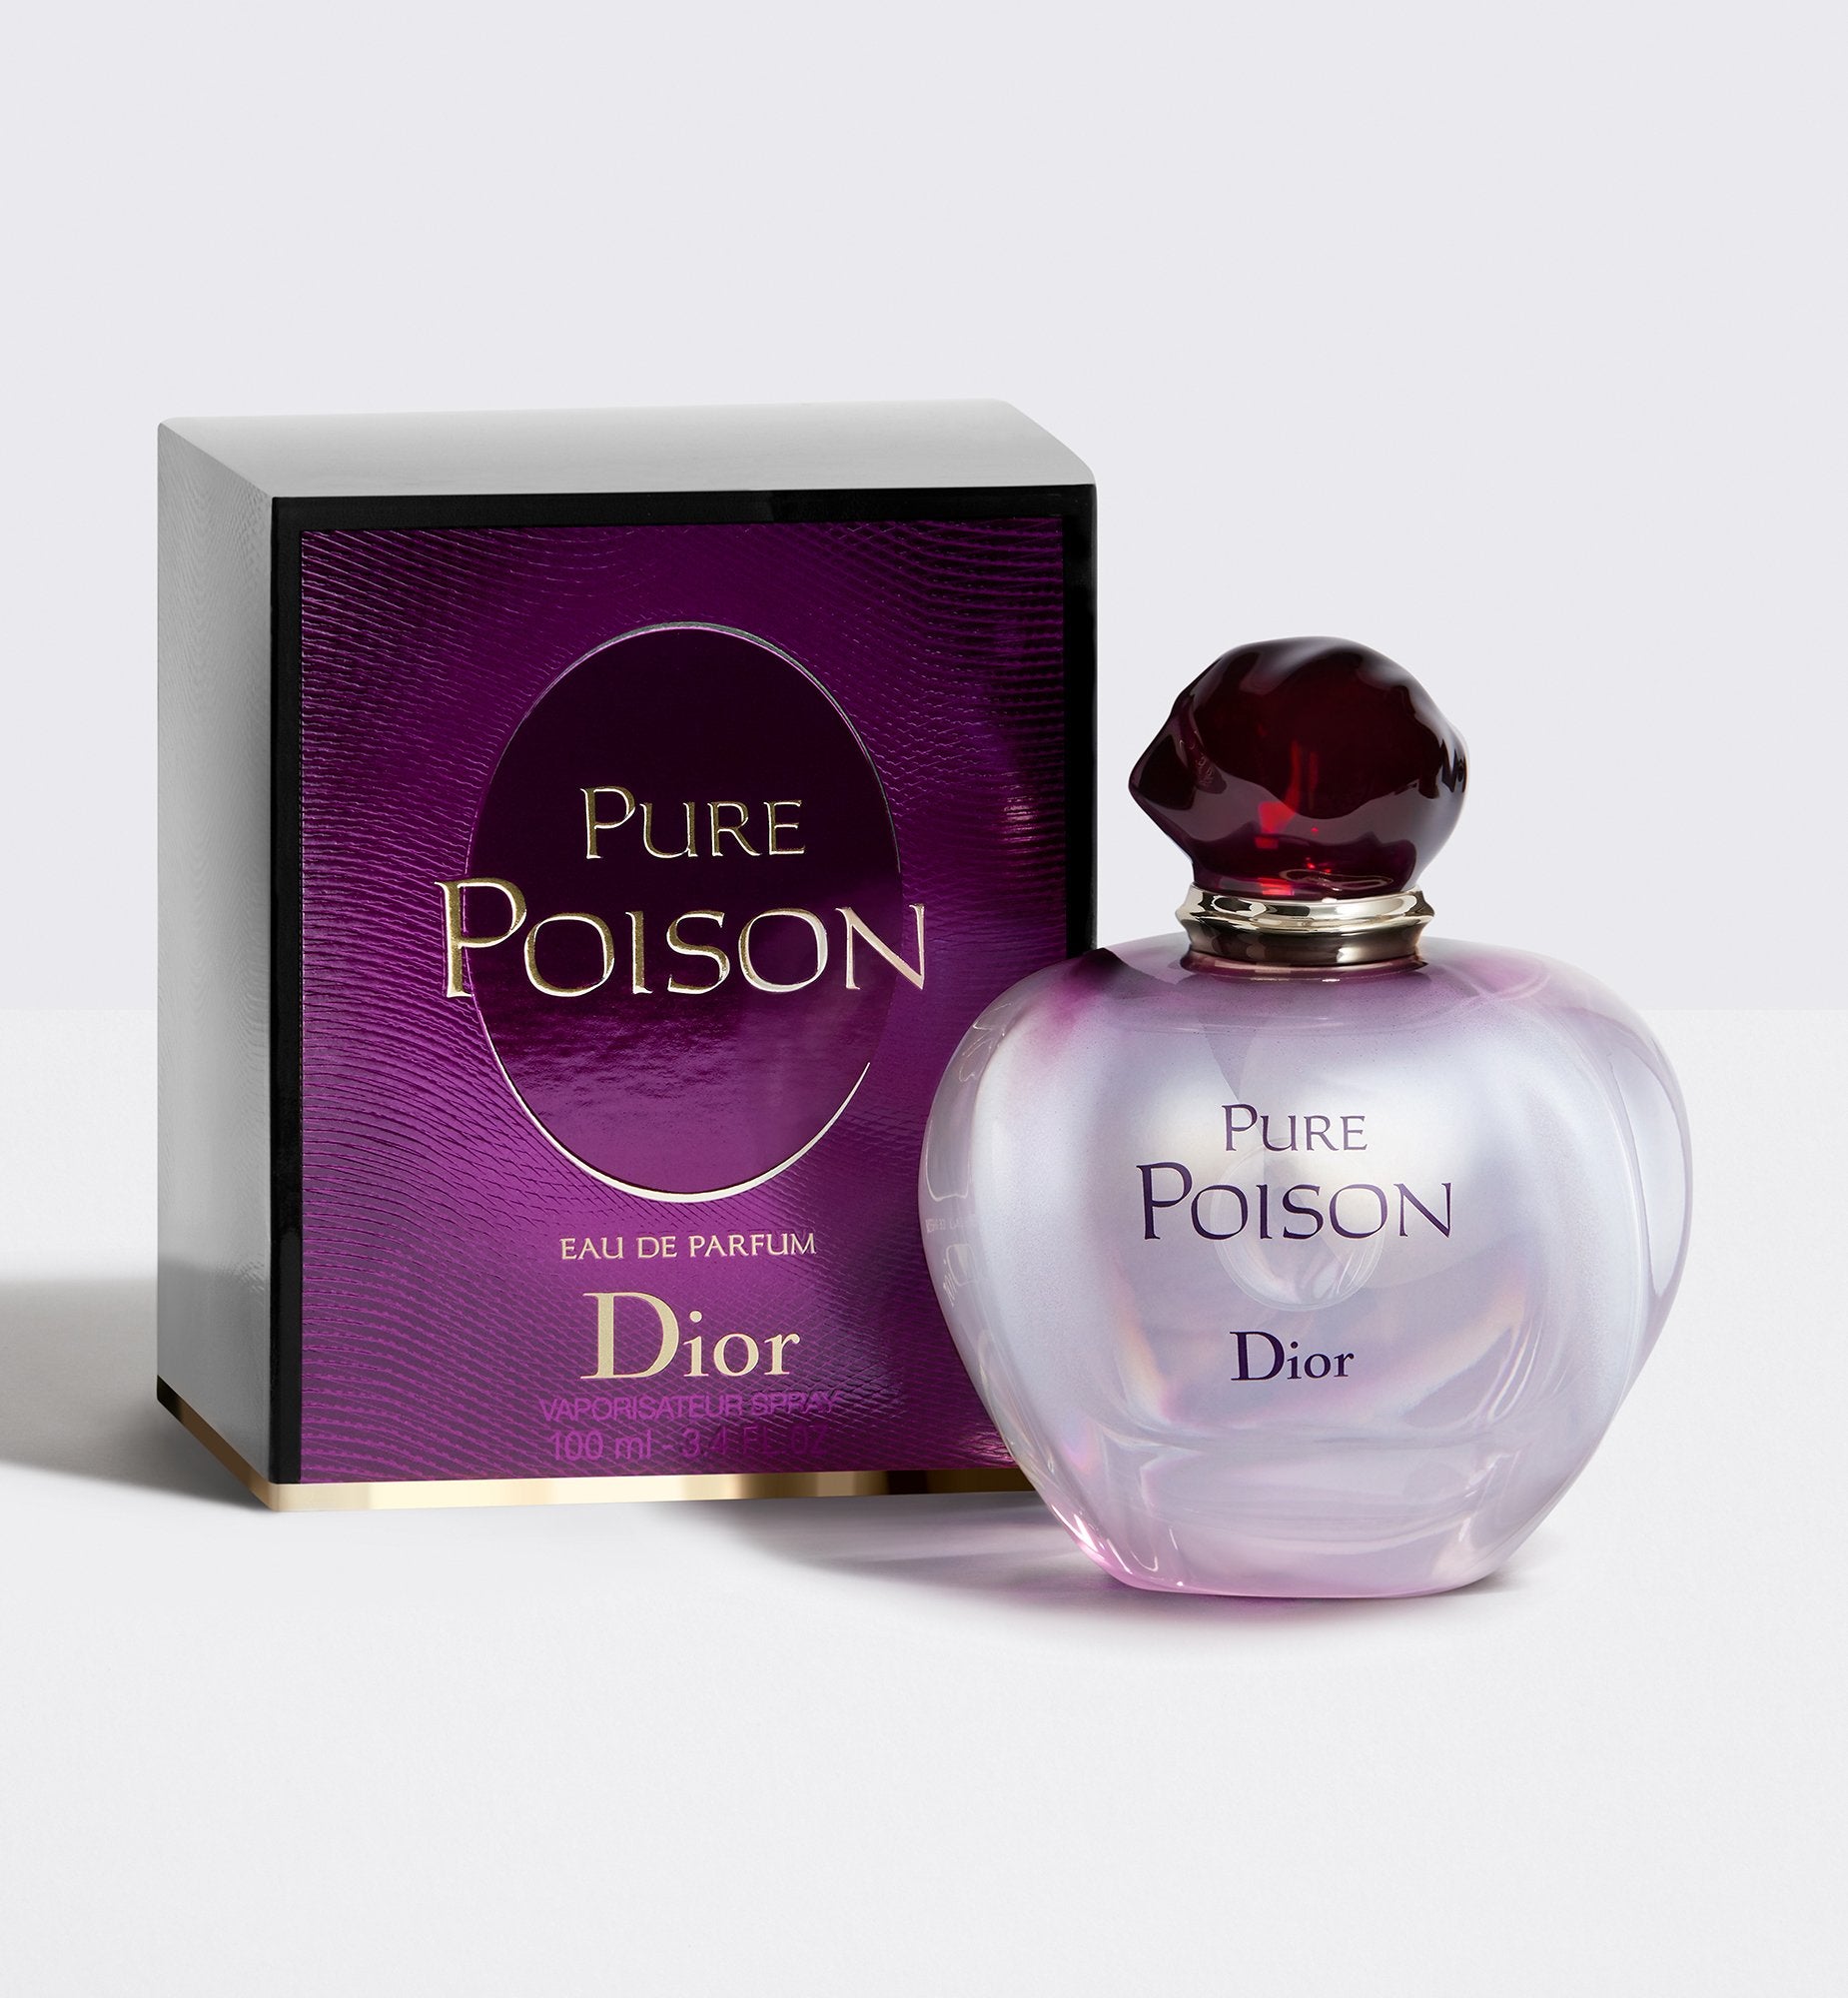 Pure Poison by Christian Dior 